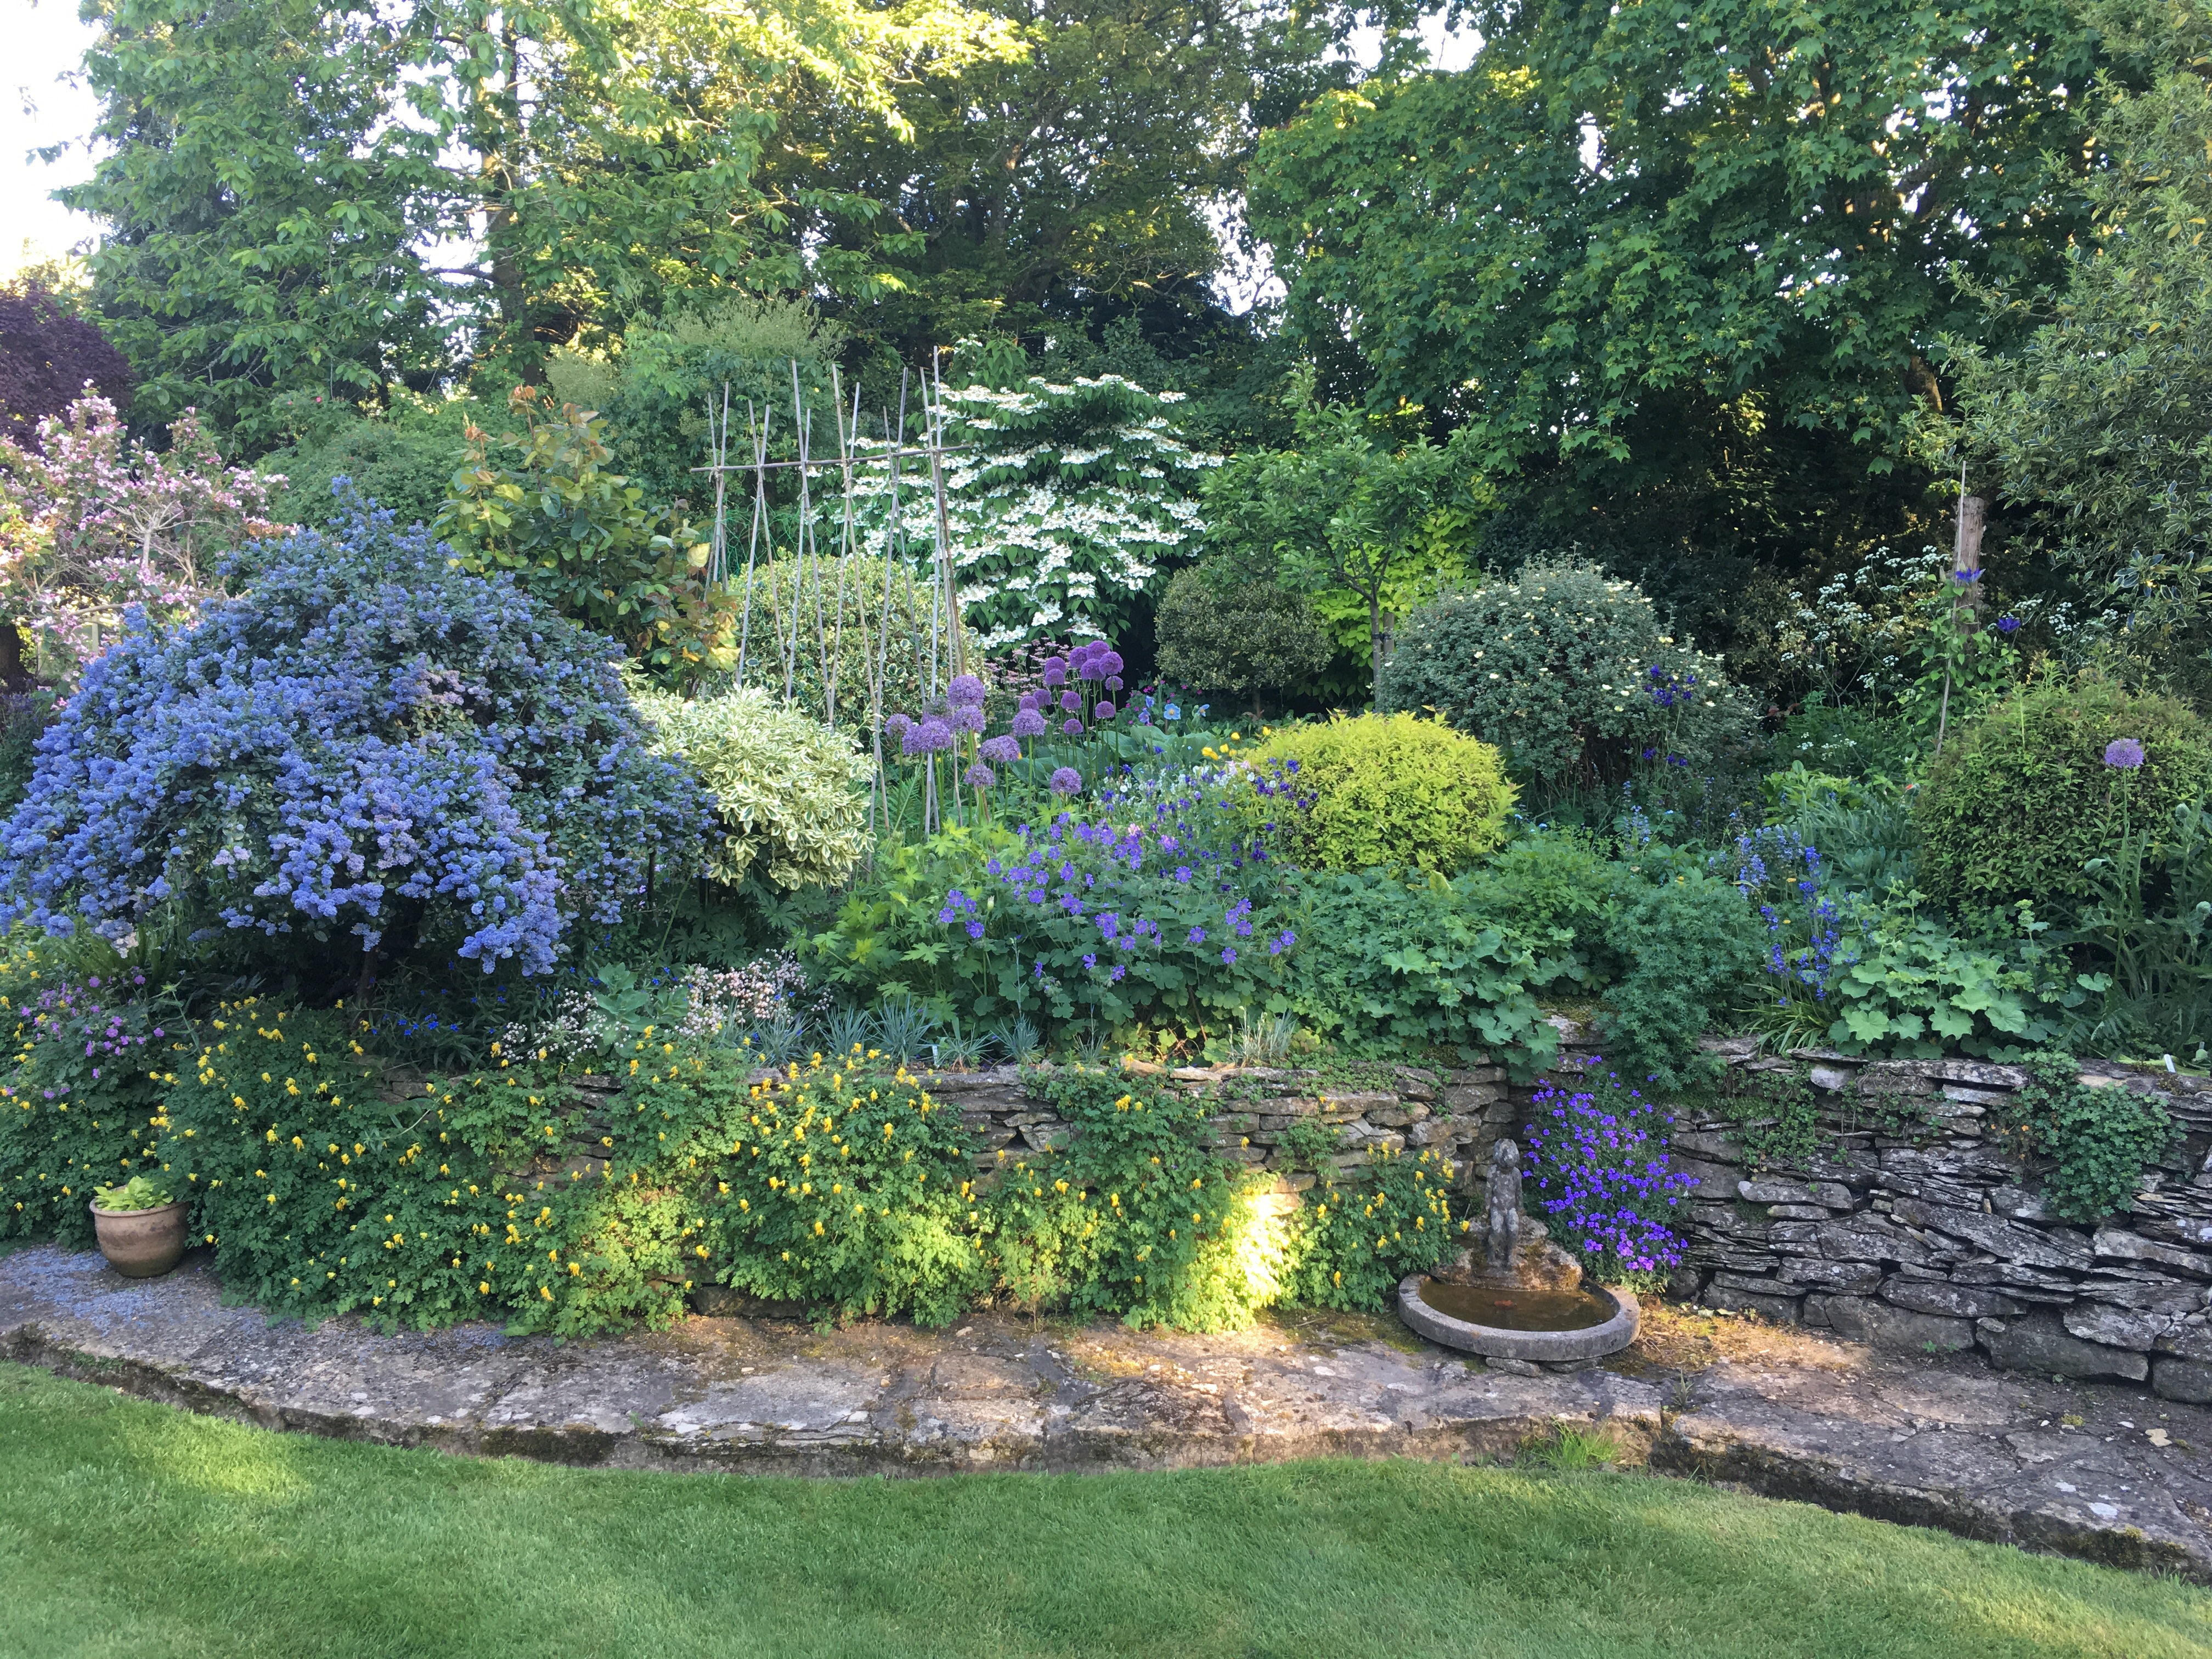 video diary of a year in the life of a beautiful English garden